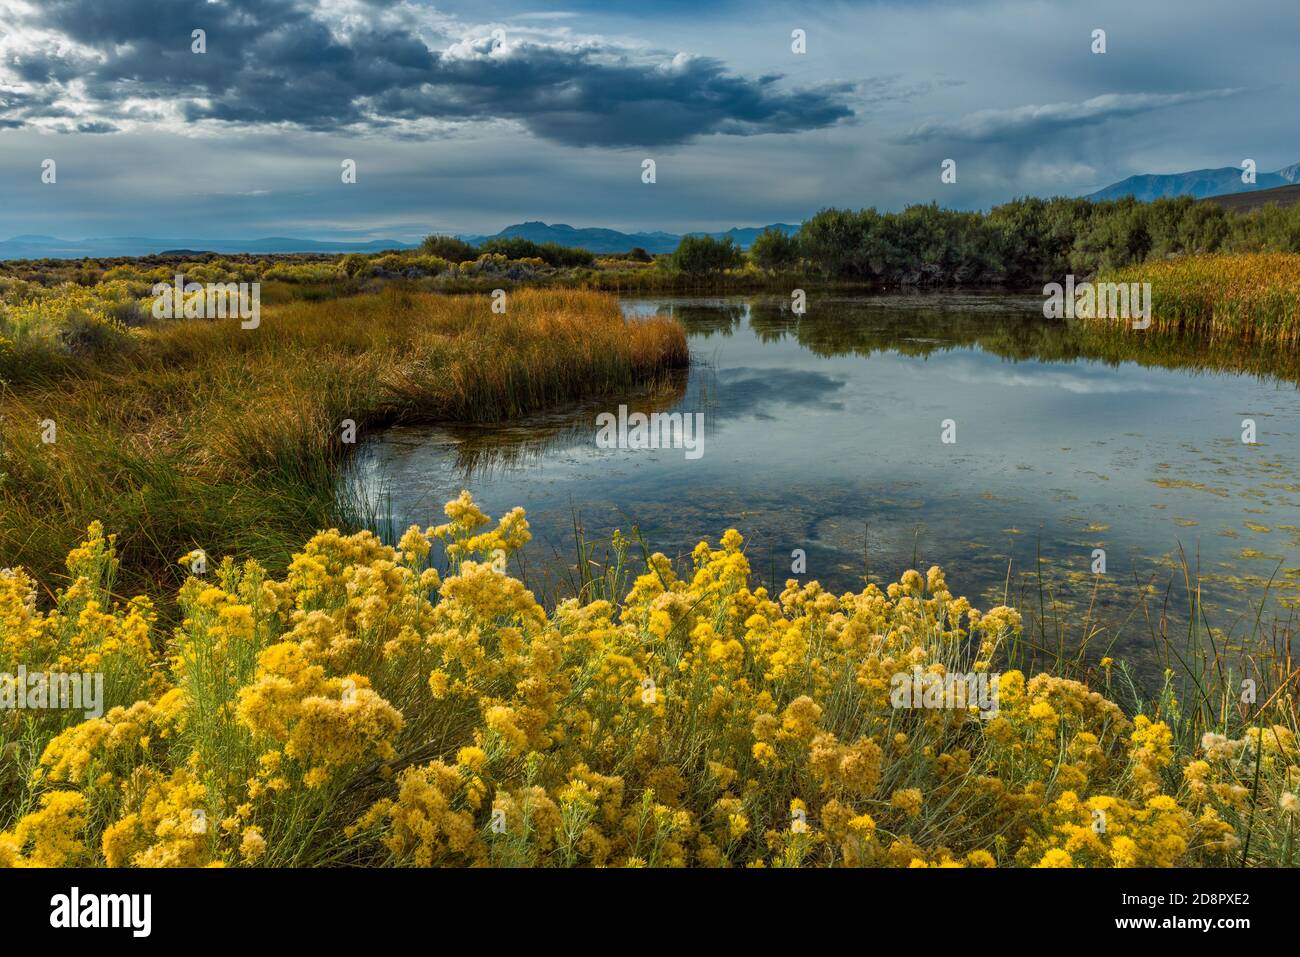 Rabbitbrush, Warm Springs, Mono Basin National Forest Scenic Area, Inyo National Forest, California Stock Photo